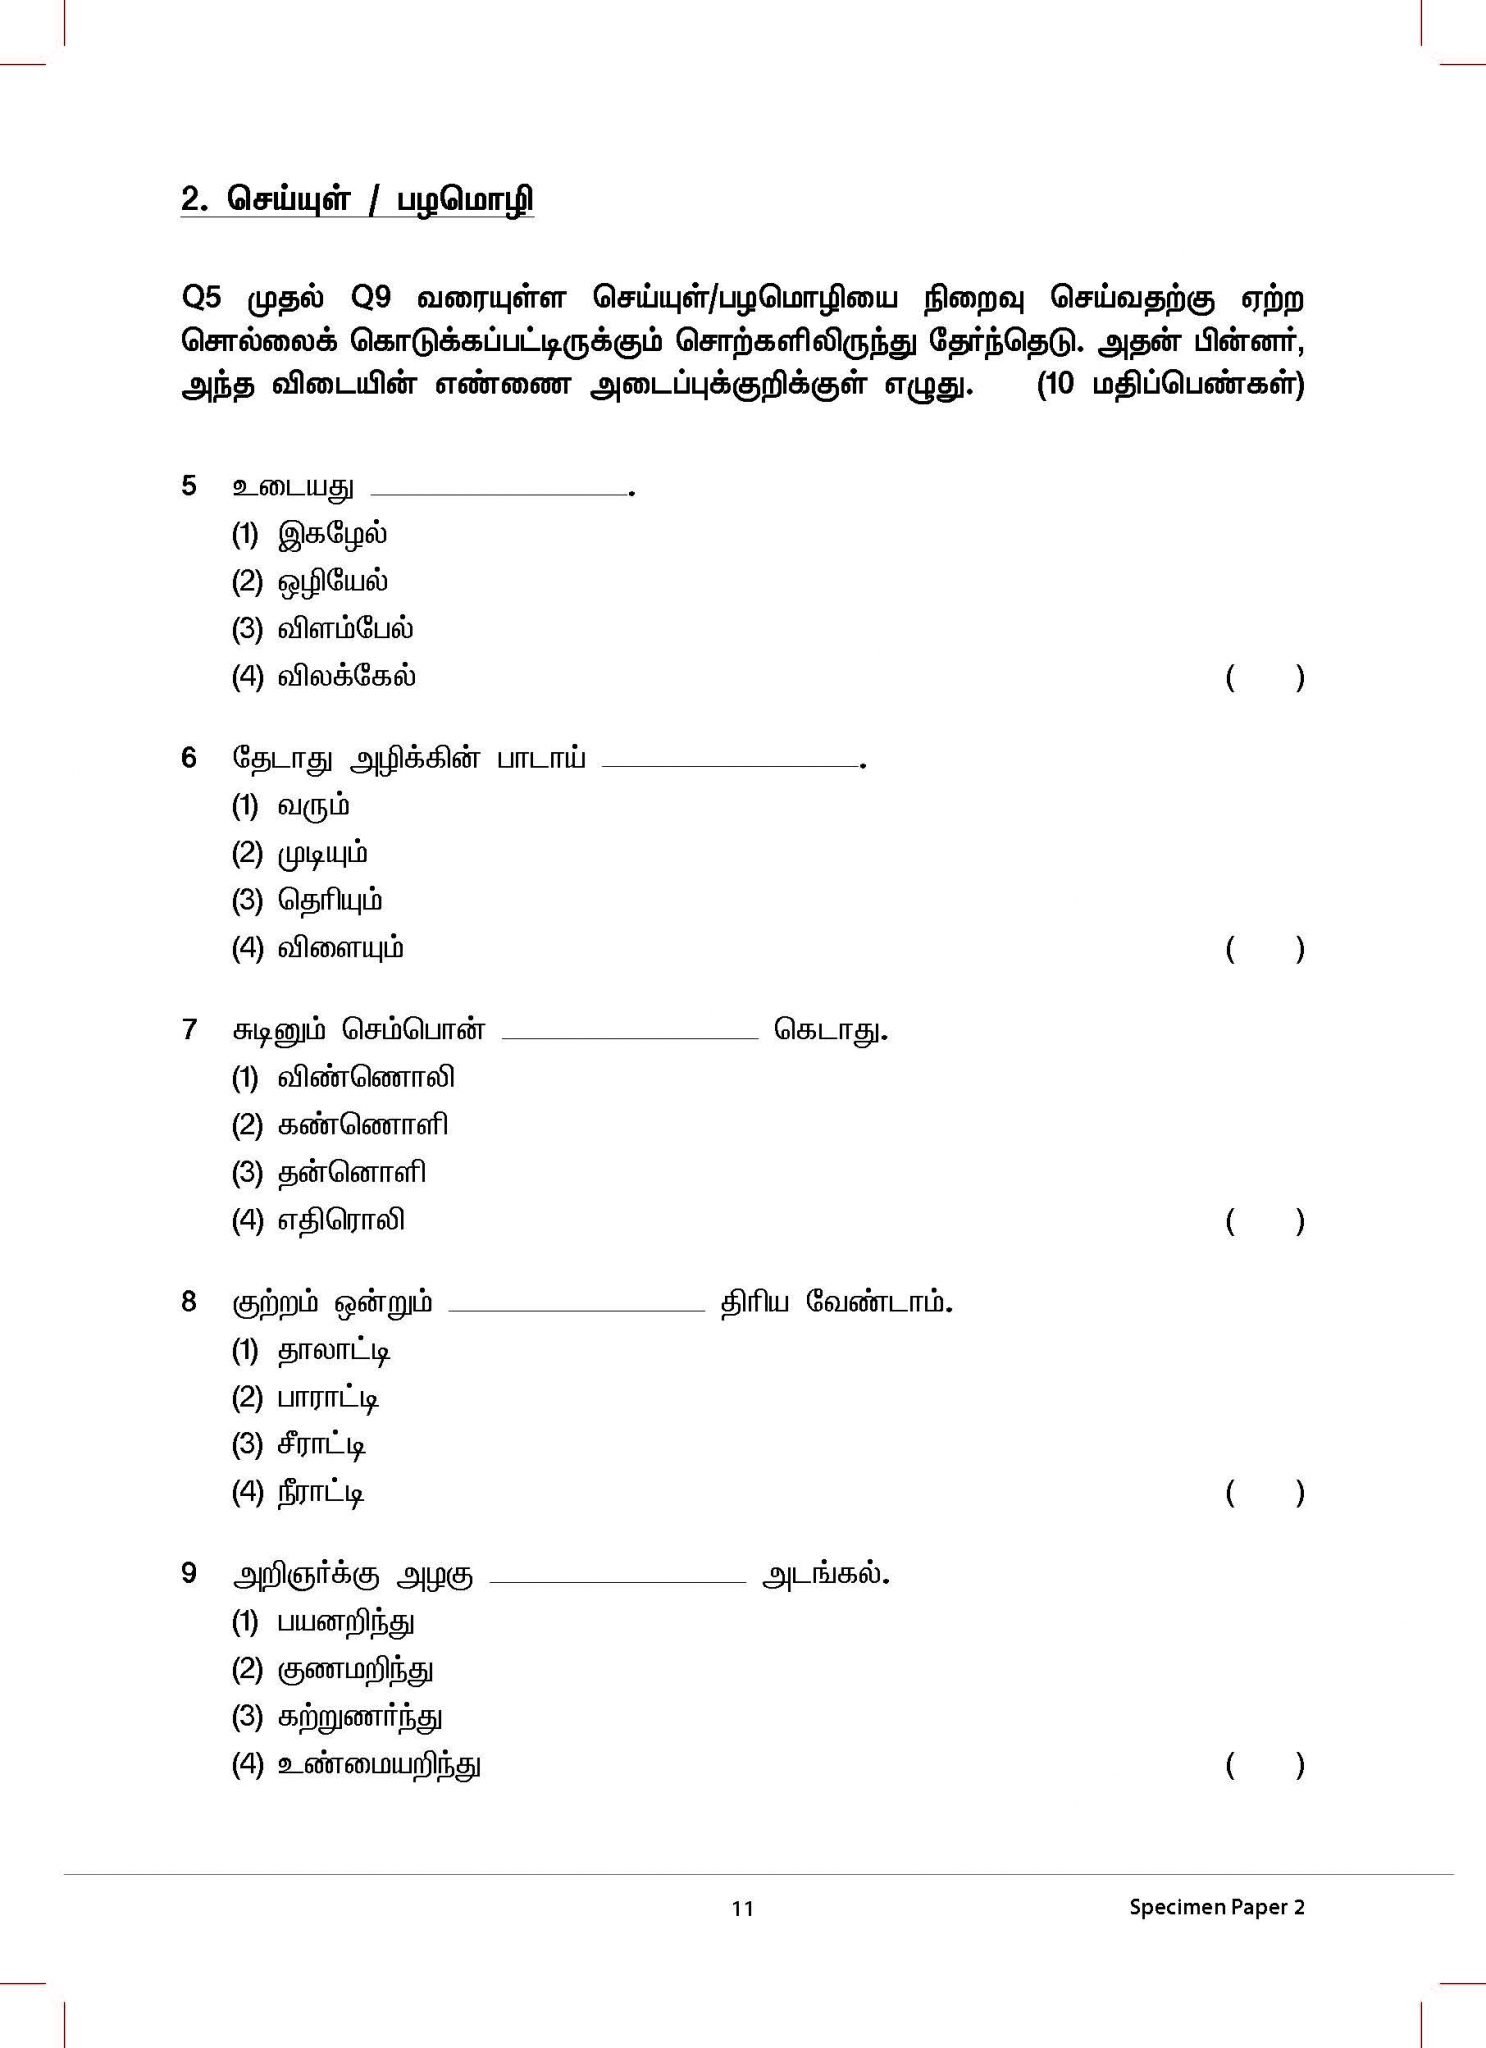 Primary 4 Tamil Specimen Papers CPD Singapore Education Services Pte Ltd